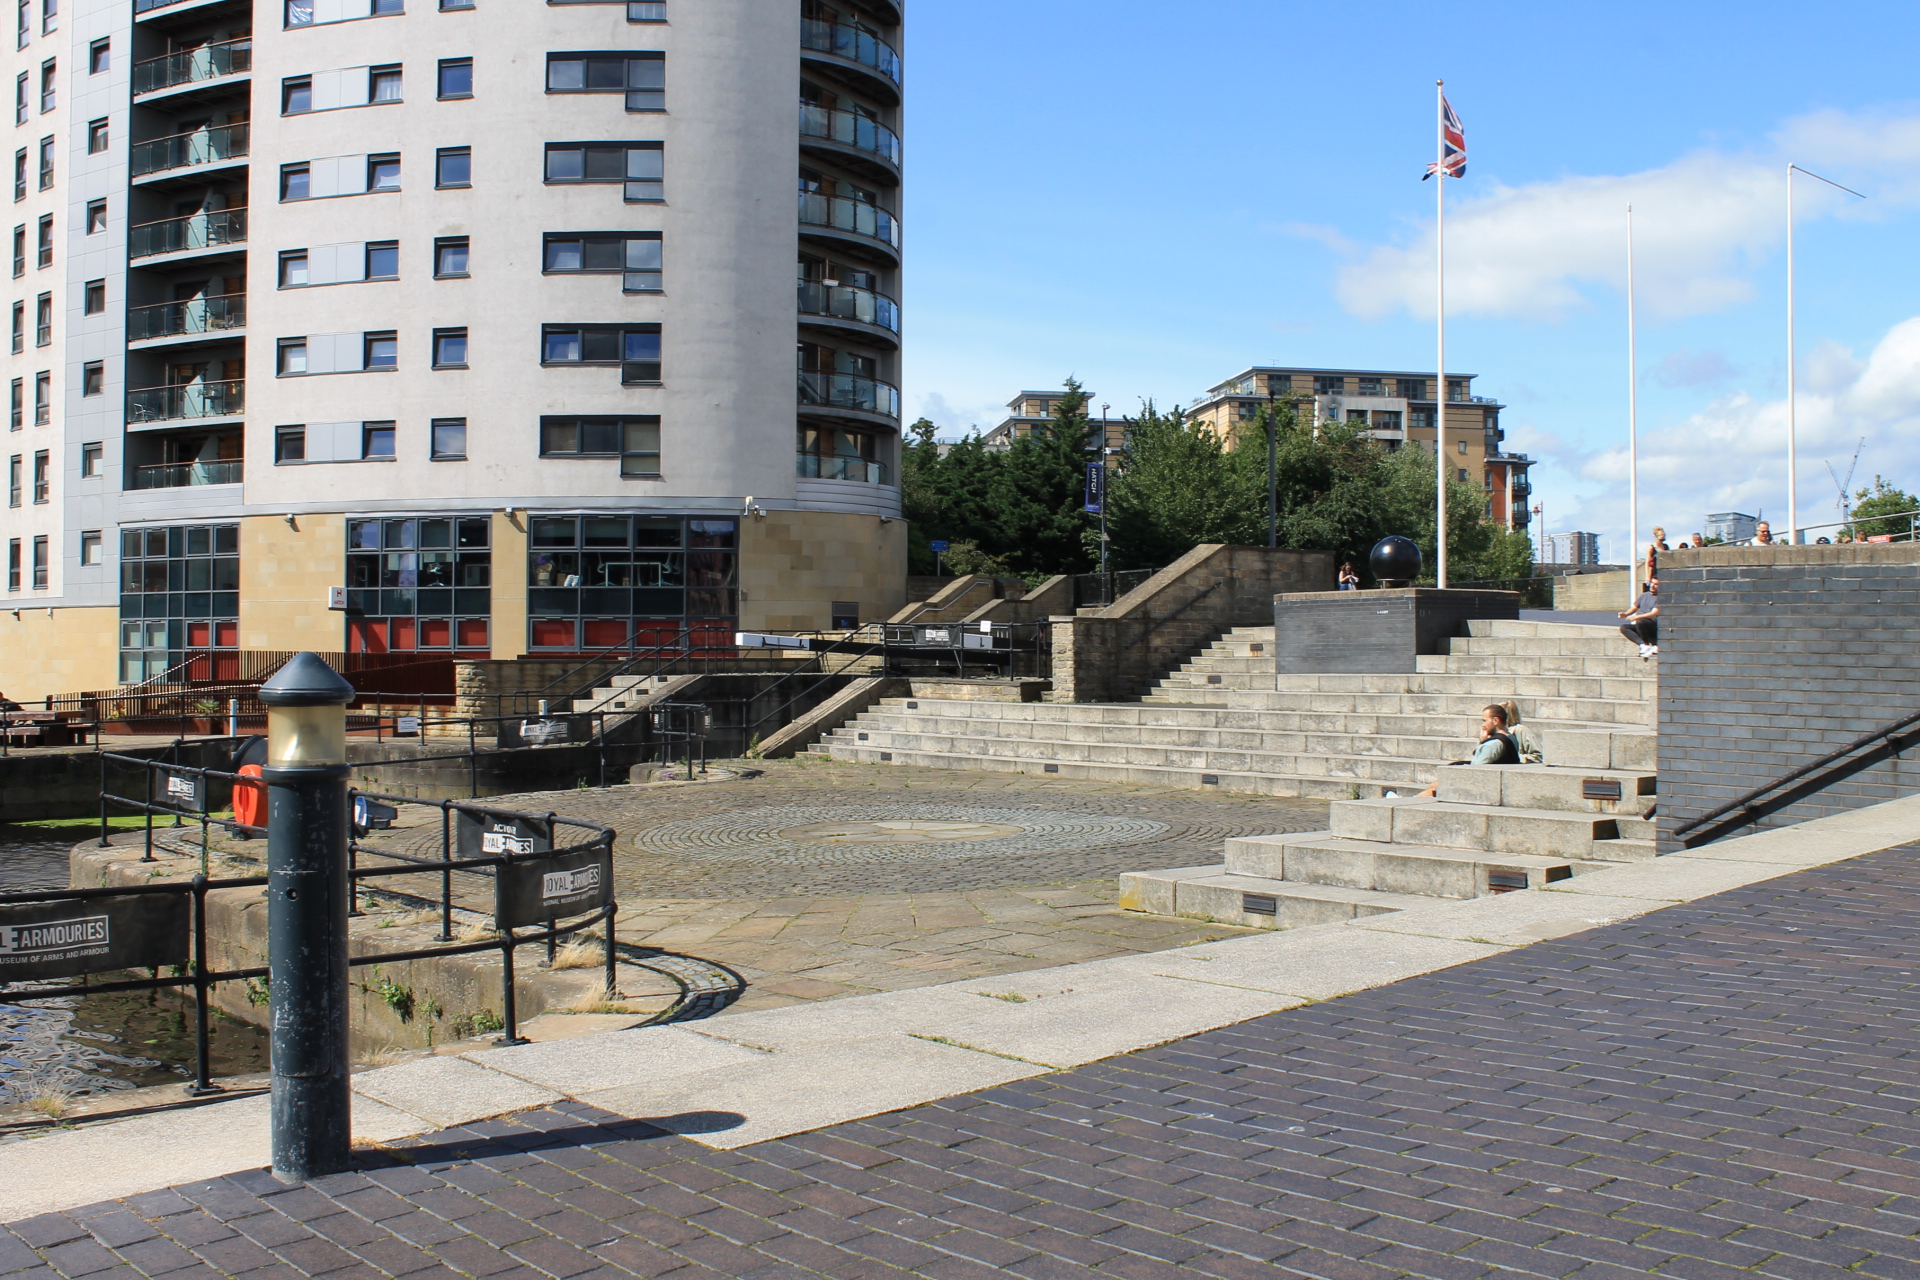 The amphitheatre at Royal Armouries